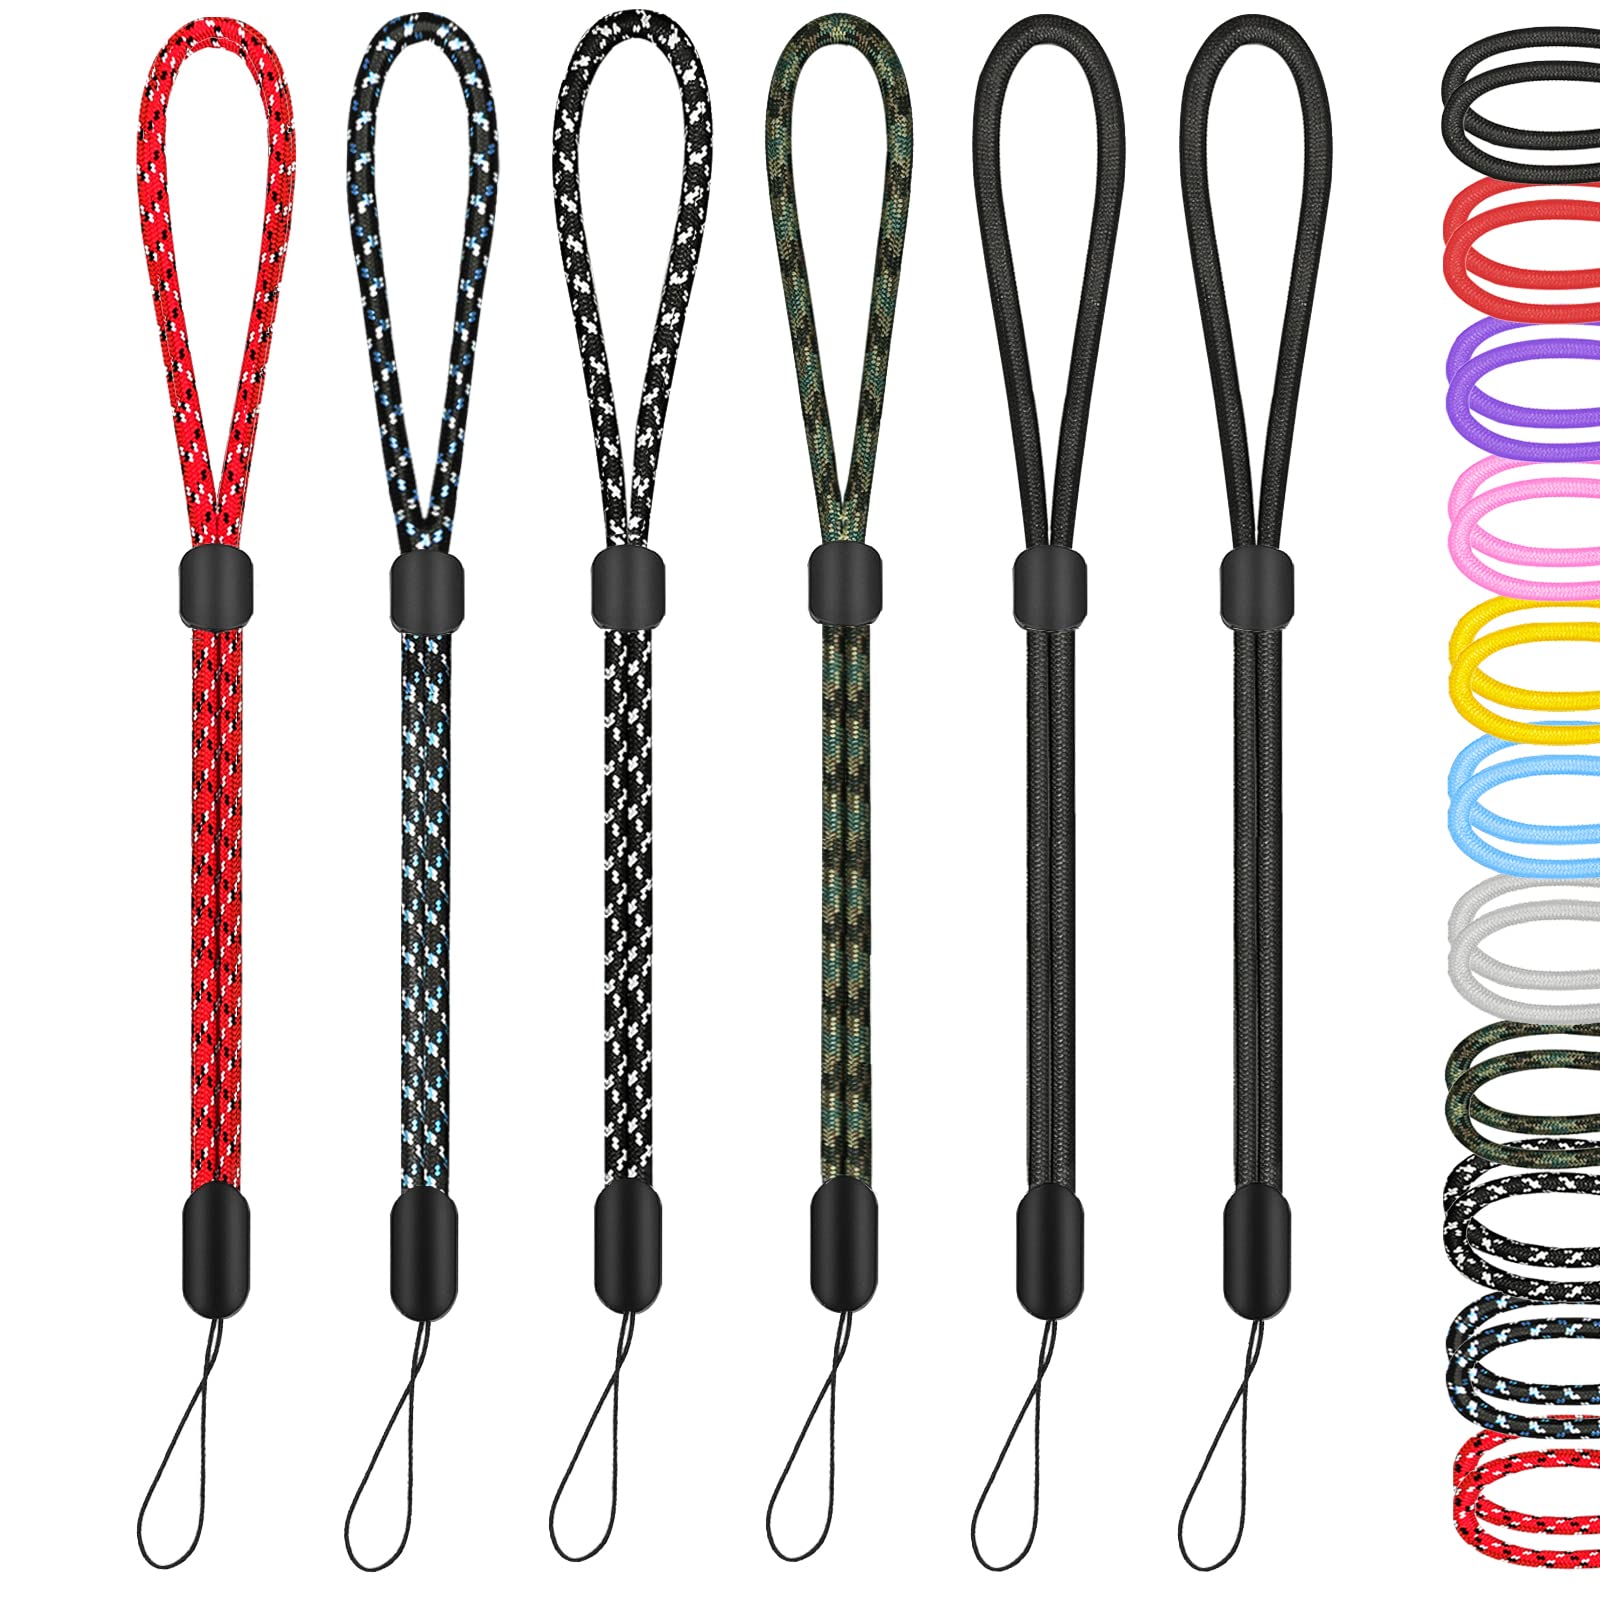 Hand Wrist Strap Lanyard, 6 Pack 9.5inch Adjustable Nylon Wristlet Straps Keychain String for Cell Phone Case Holder, AirPods Pro 2 2022, Camera, Key, GoPro, USB Drive, Ski Glove (Multi-Color)